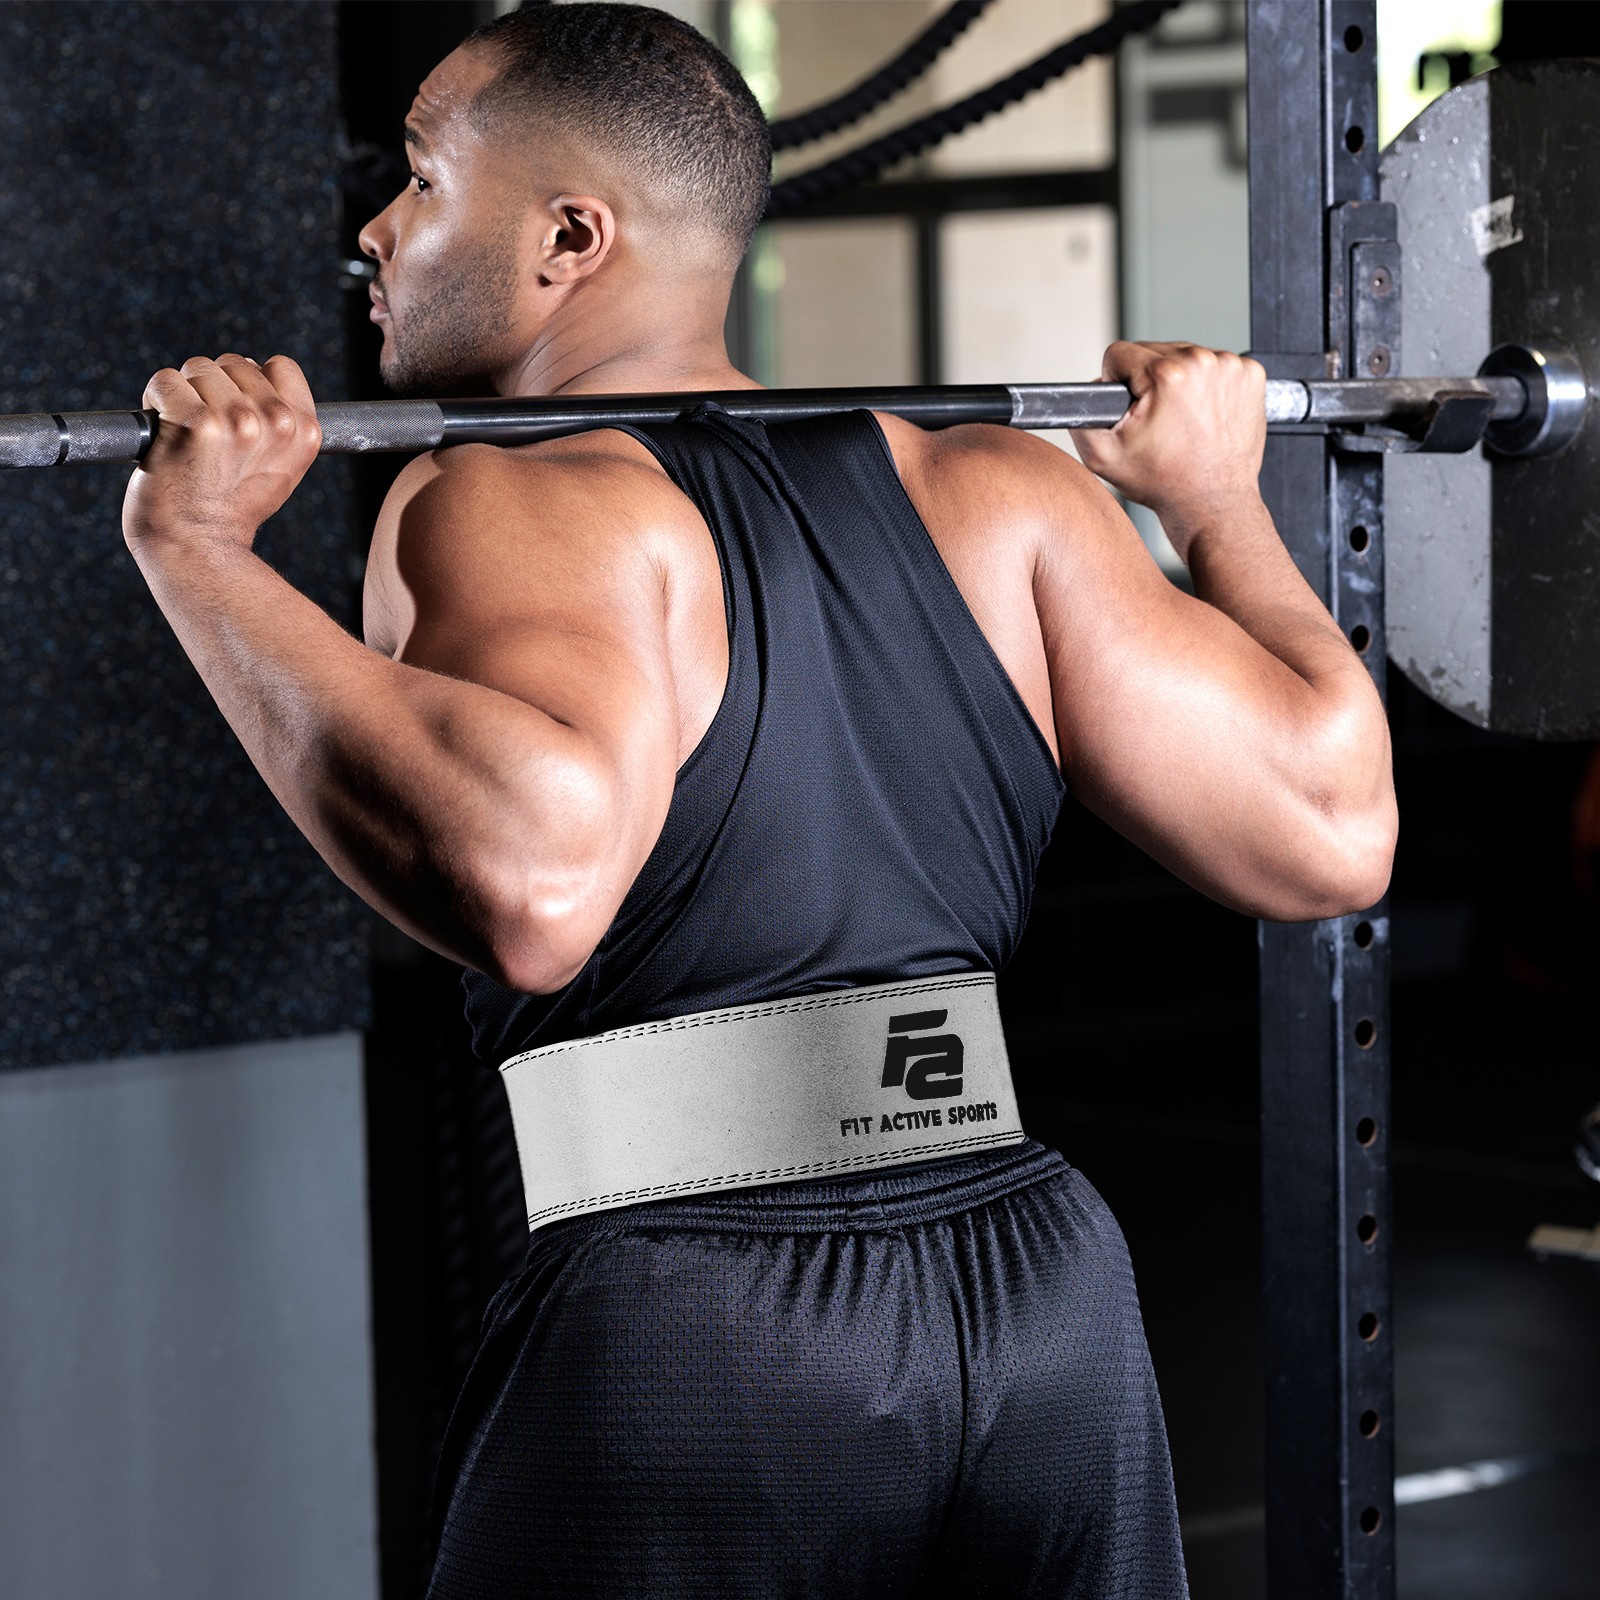 Man wearing grey lever belt preparing to squat with barbell